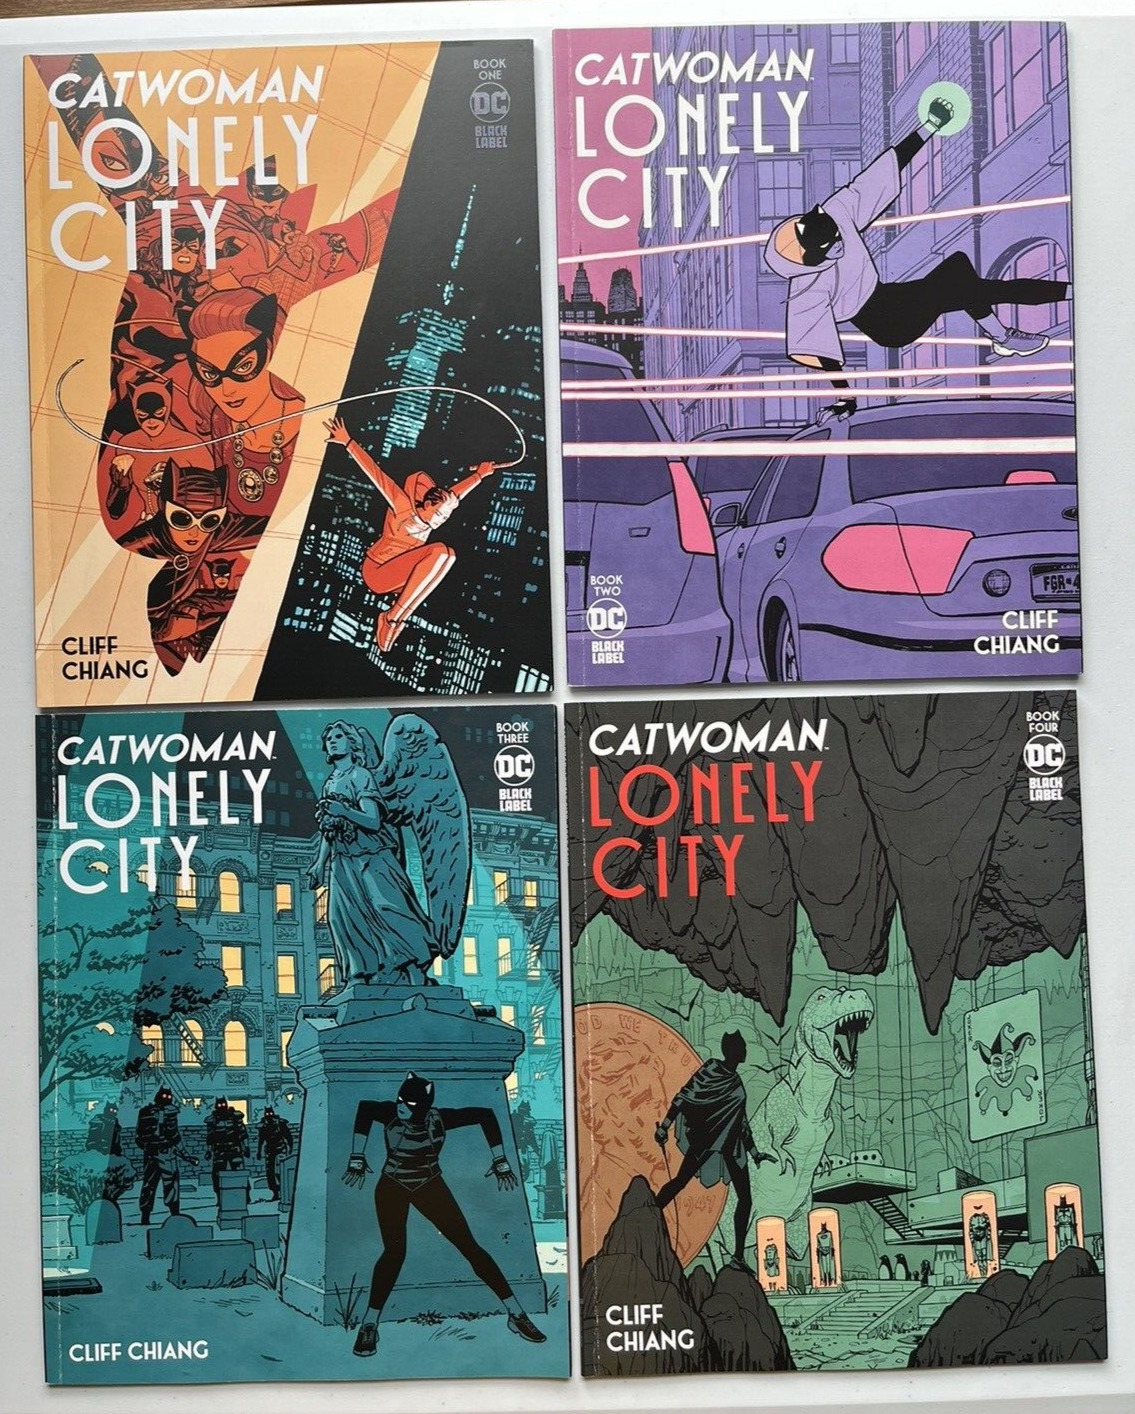 Catwoman Lonely City # 1 2 3 4 Complete Set Series Run Chiang / DC Black Label